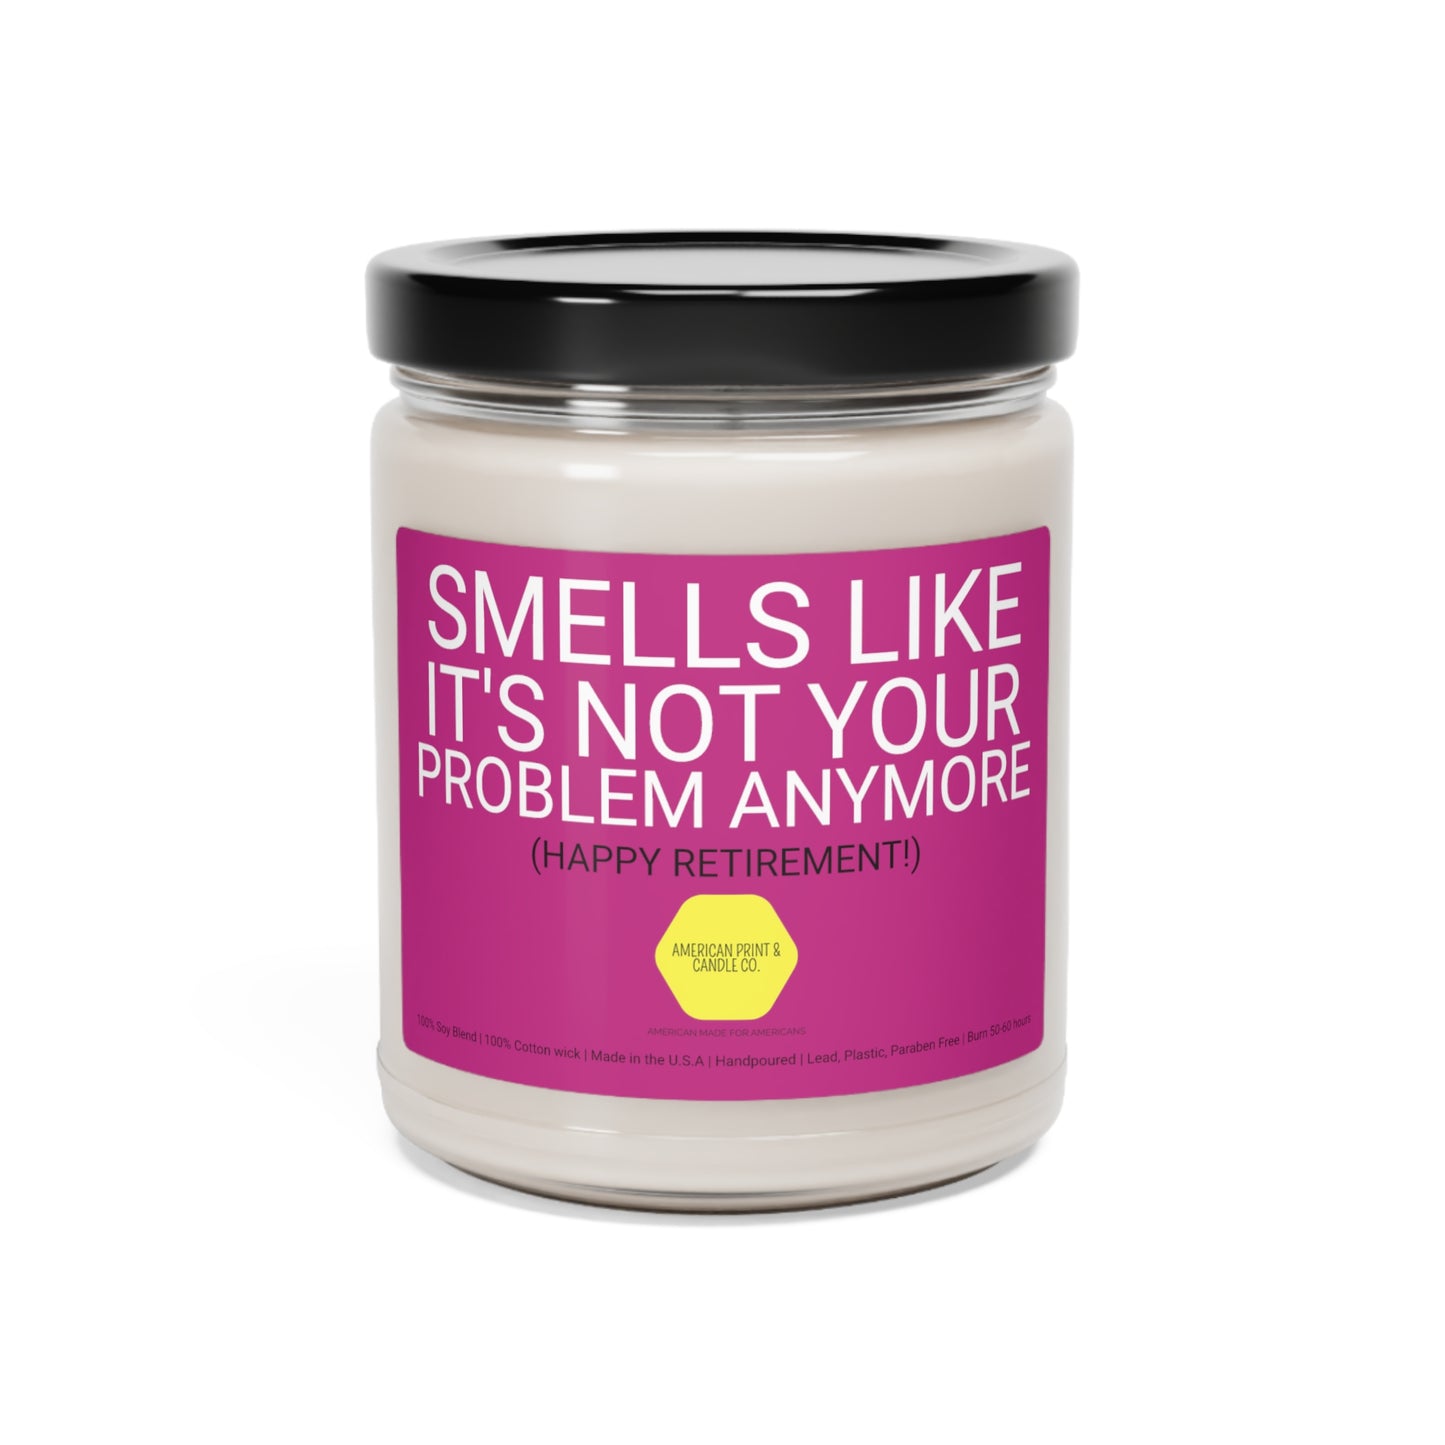 Smells like it's not your problem anymore, Happy Retirement Scented Soy Blend Jar Candle, 9oz